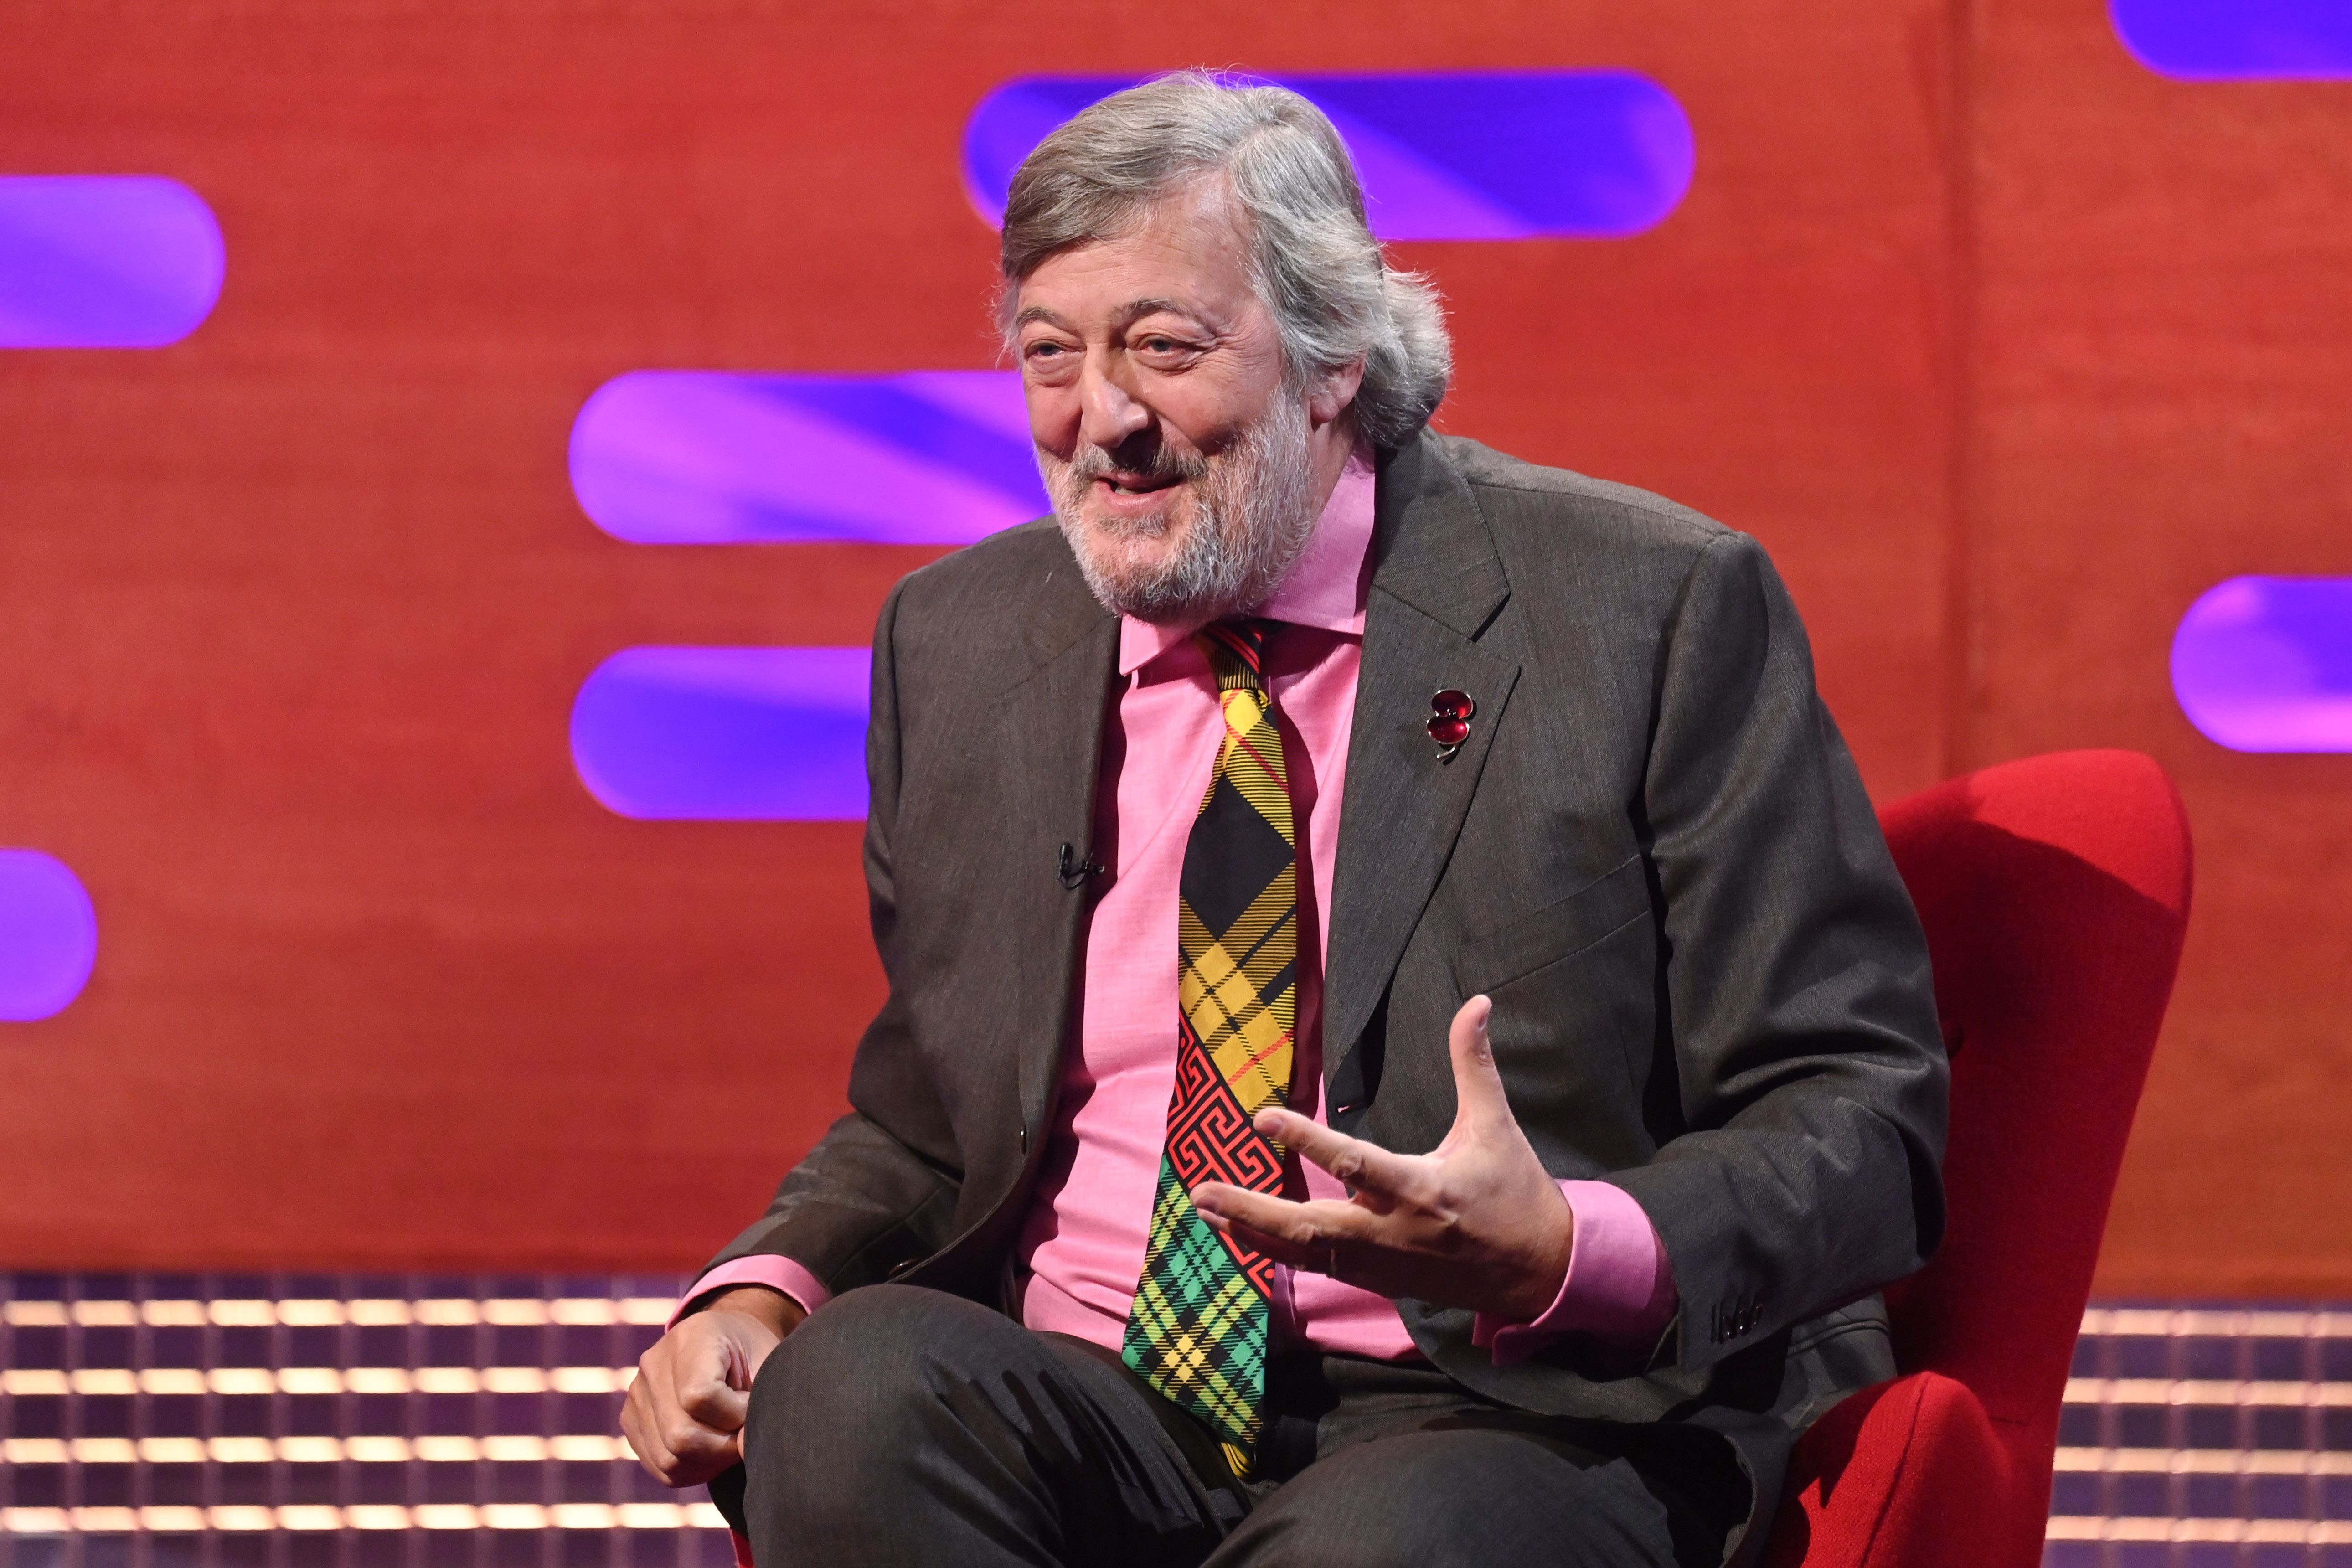 Stephen Fry said creating the NHS was ‘one of the proudest things Britain has ever done’ (Matt Crossick/PA)